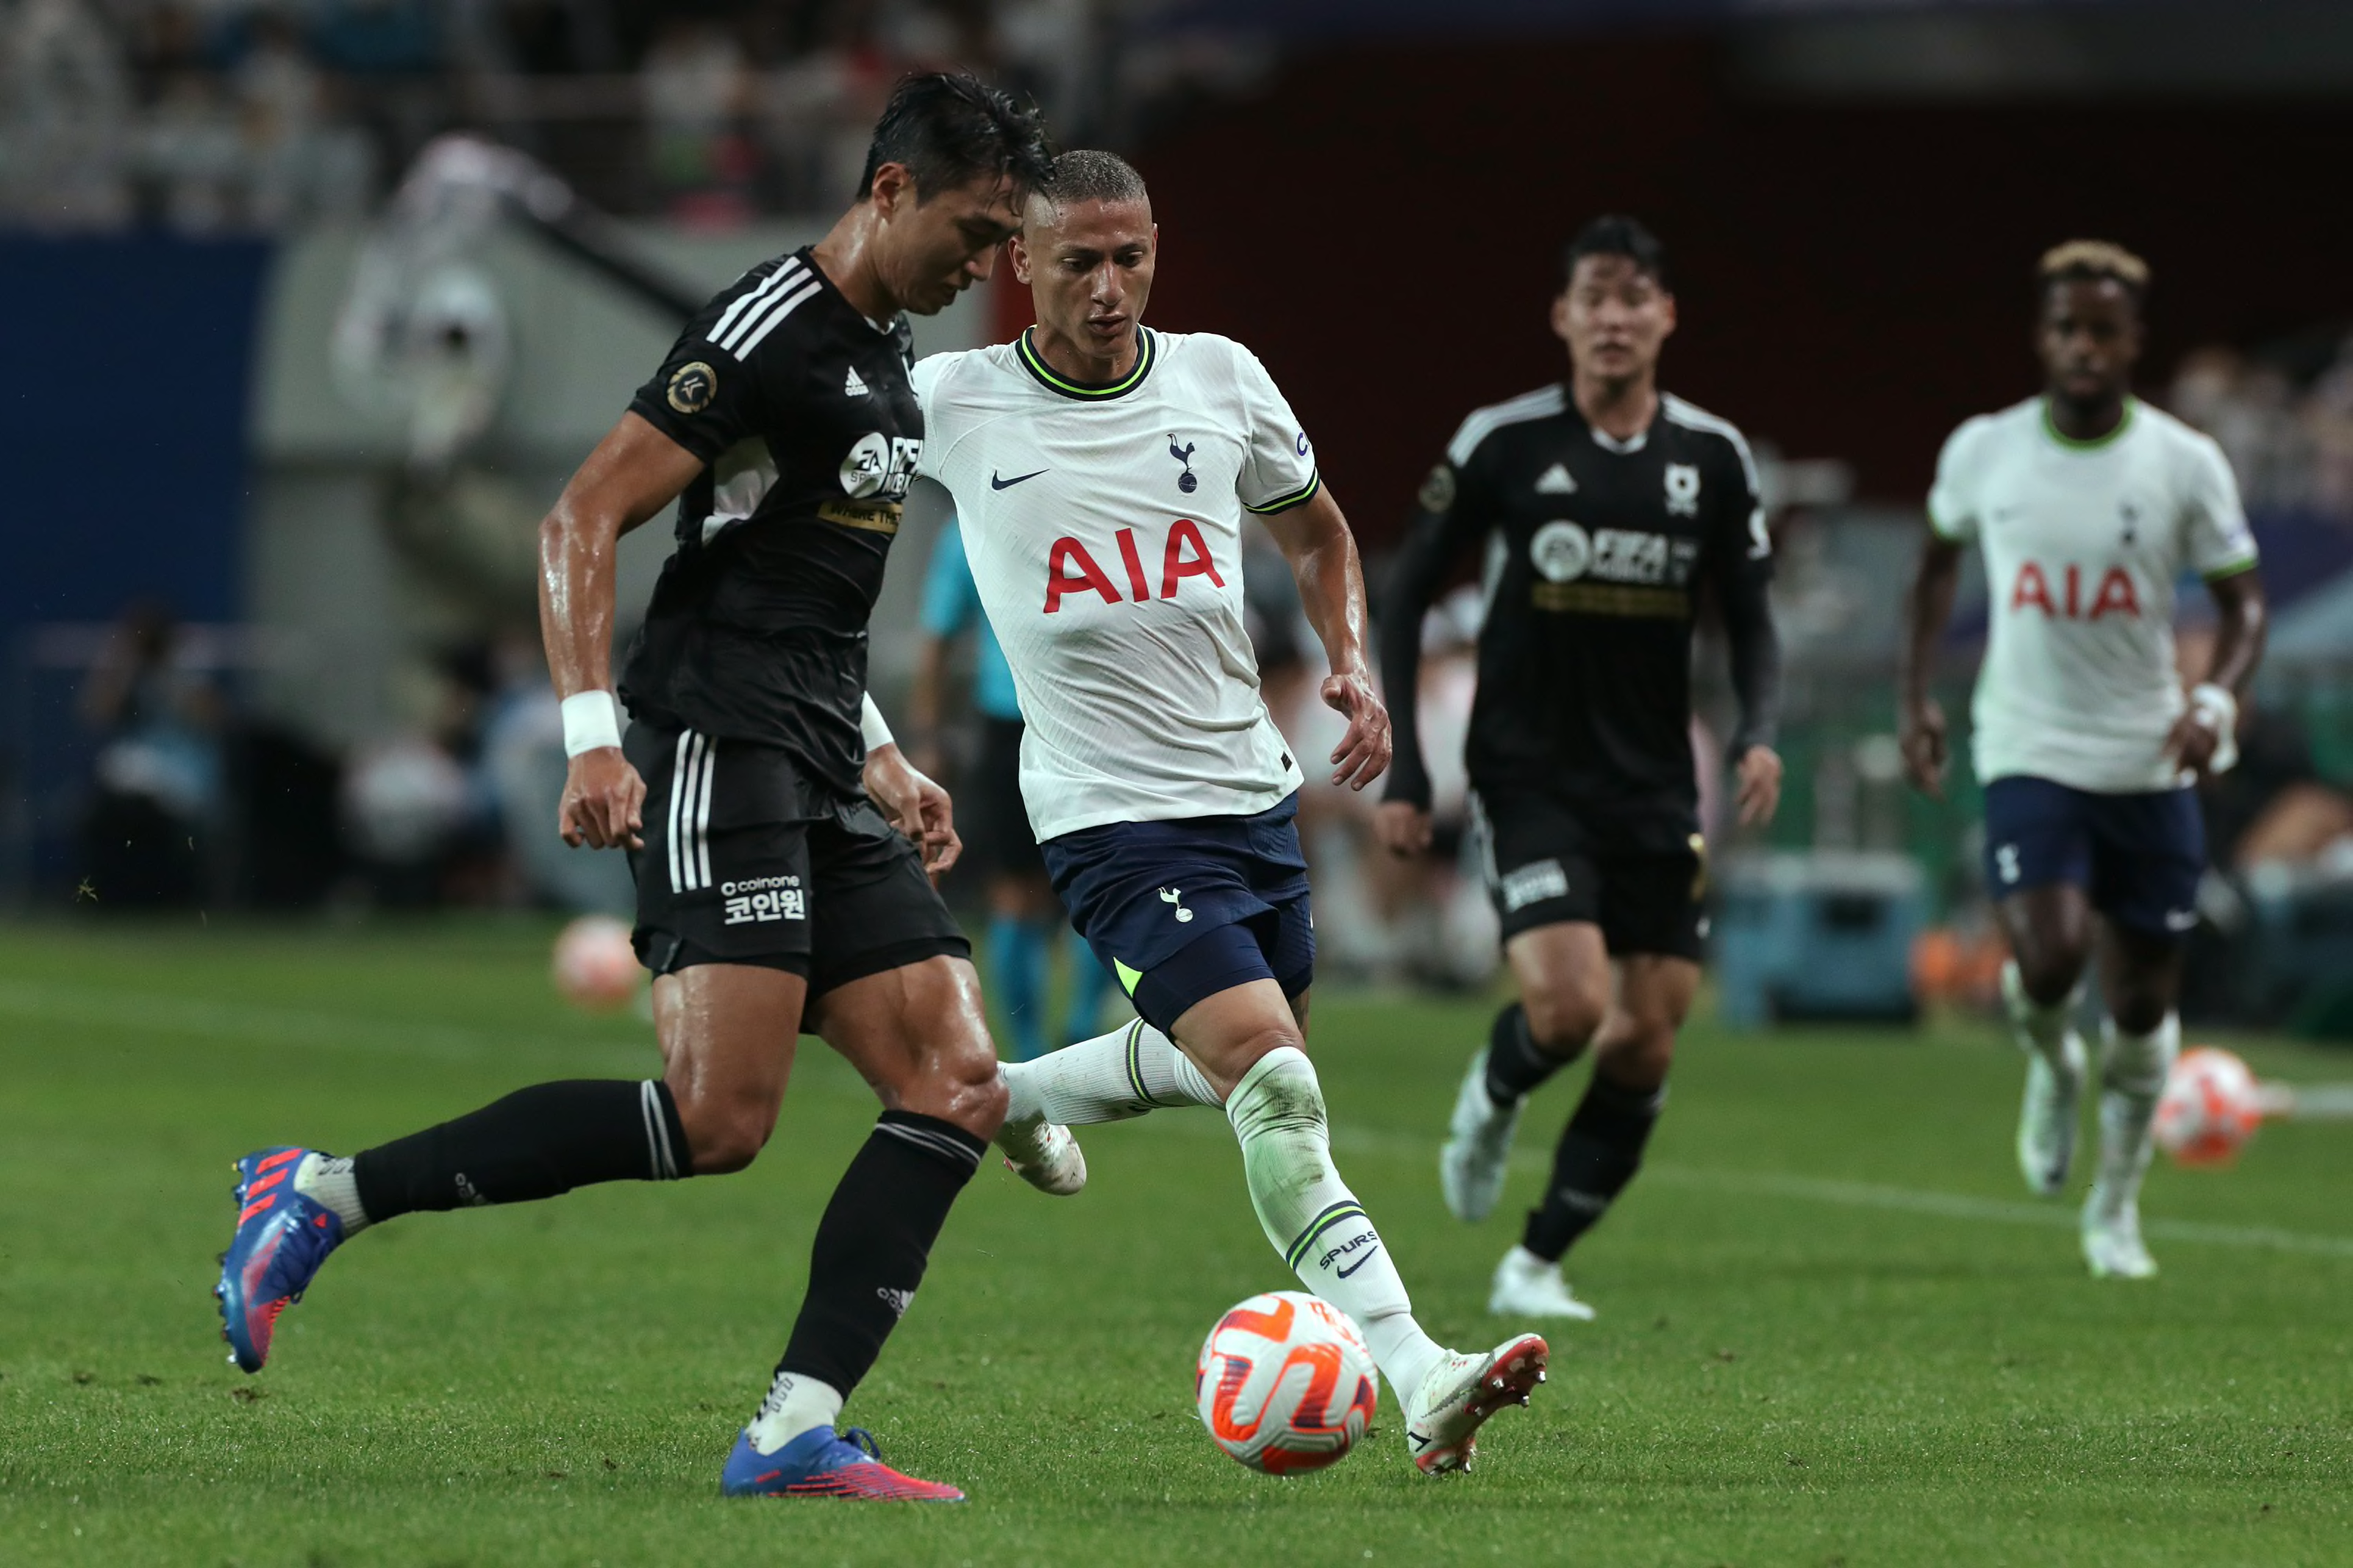 SEOUL, SOUTH KOREA - JULY 13: Richarlison of Tottenham Hotspur in action during the preseason friendly match between Tottenham Hotspur and Team K League at Seoul World Cup Stadium on July 13, 2022 in Seoul, South Korea. (Photo by Han Myung-Gu/Getty Images)